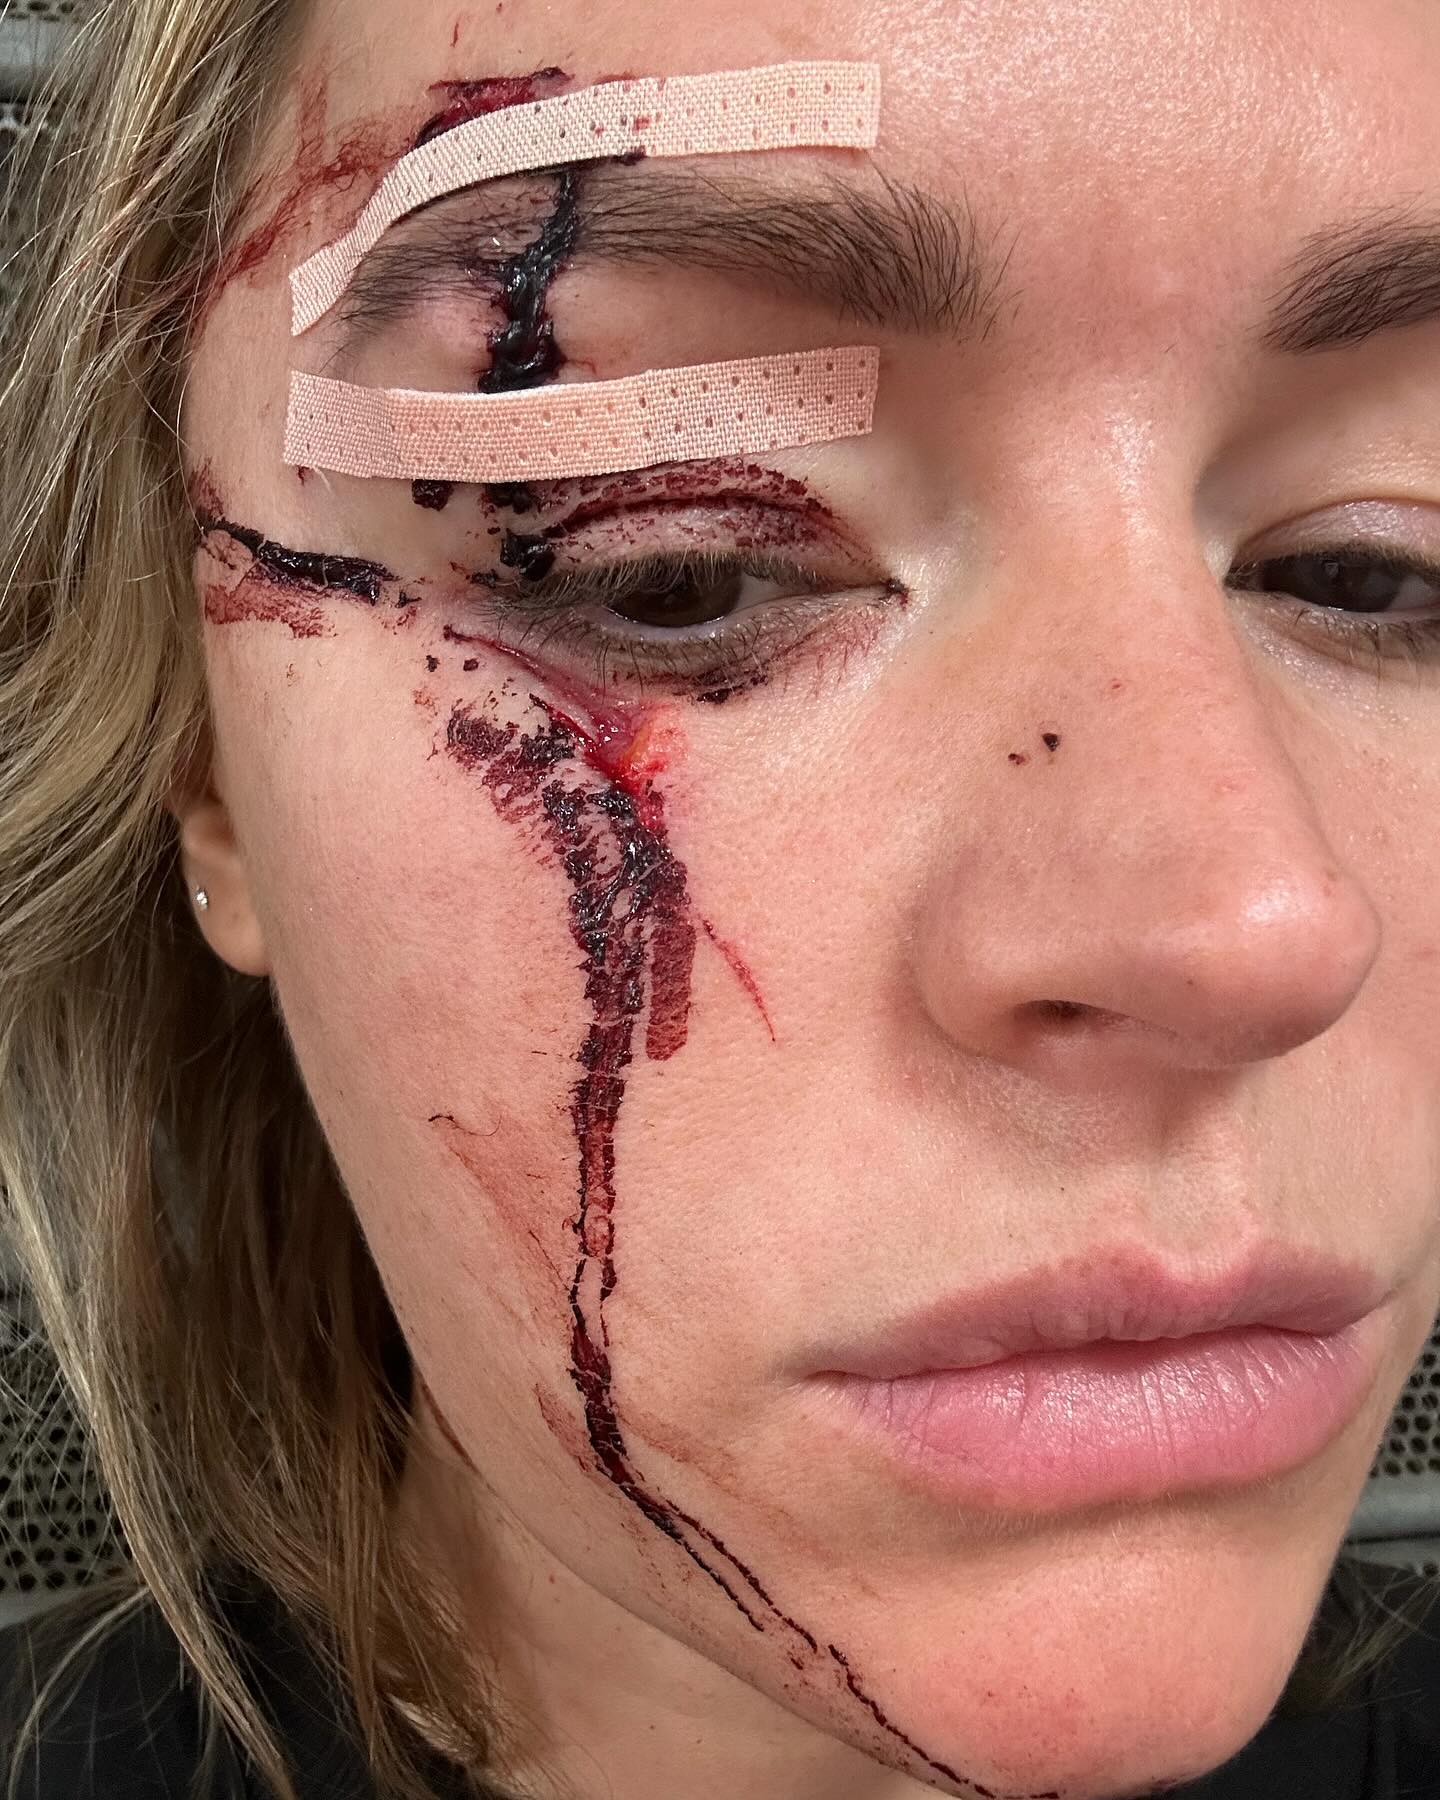 The star suffered a nasty cut to her face and arm on holiday